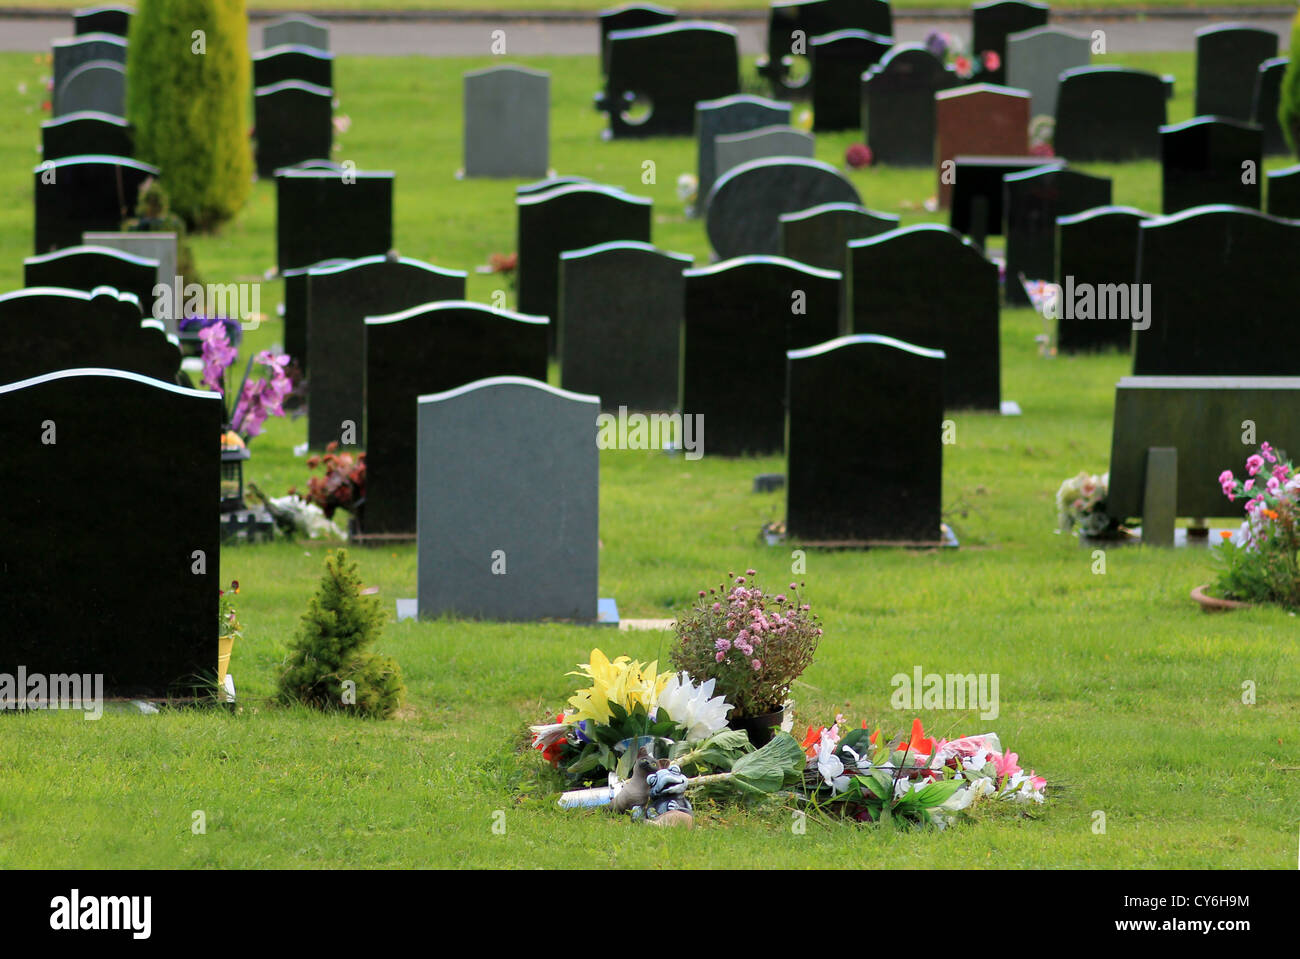 Flowers on new grave in cemetery with headstones in background. Focus on foreground. Stock Photo